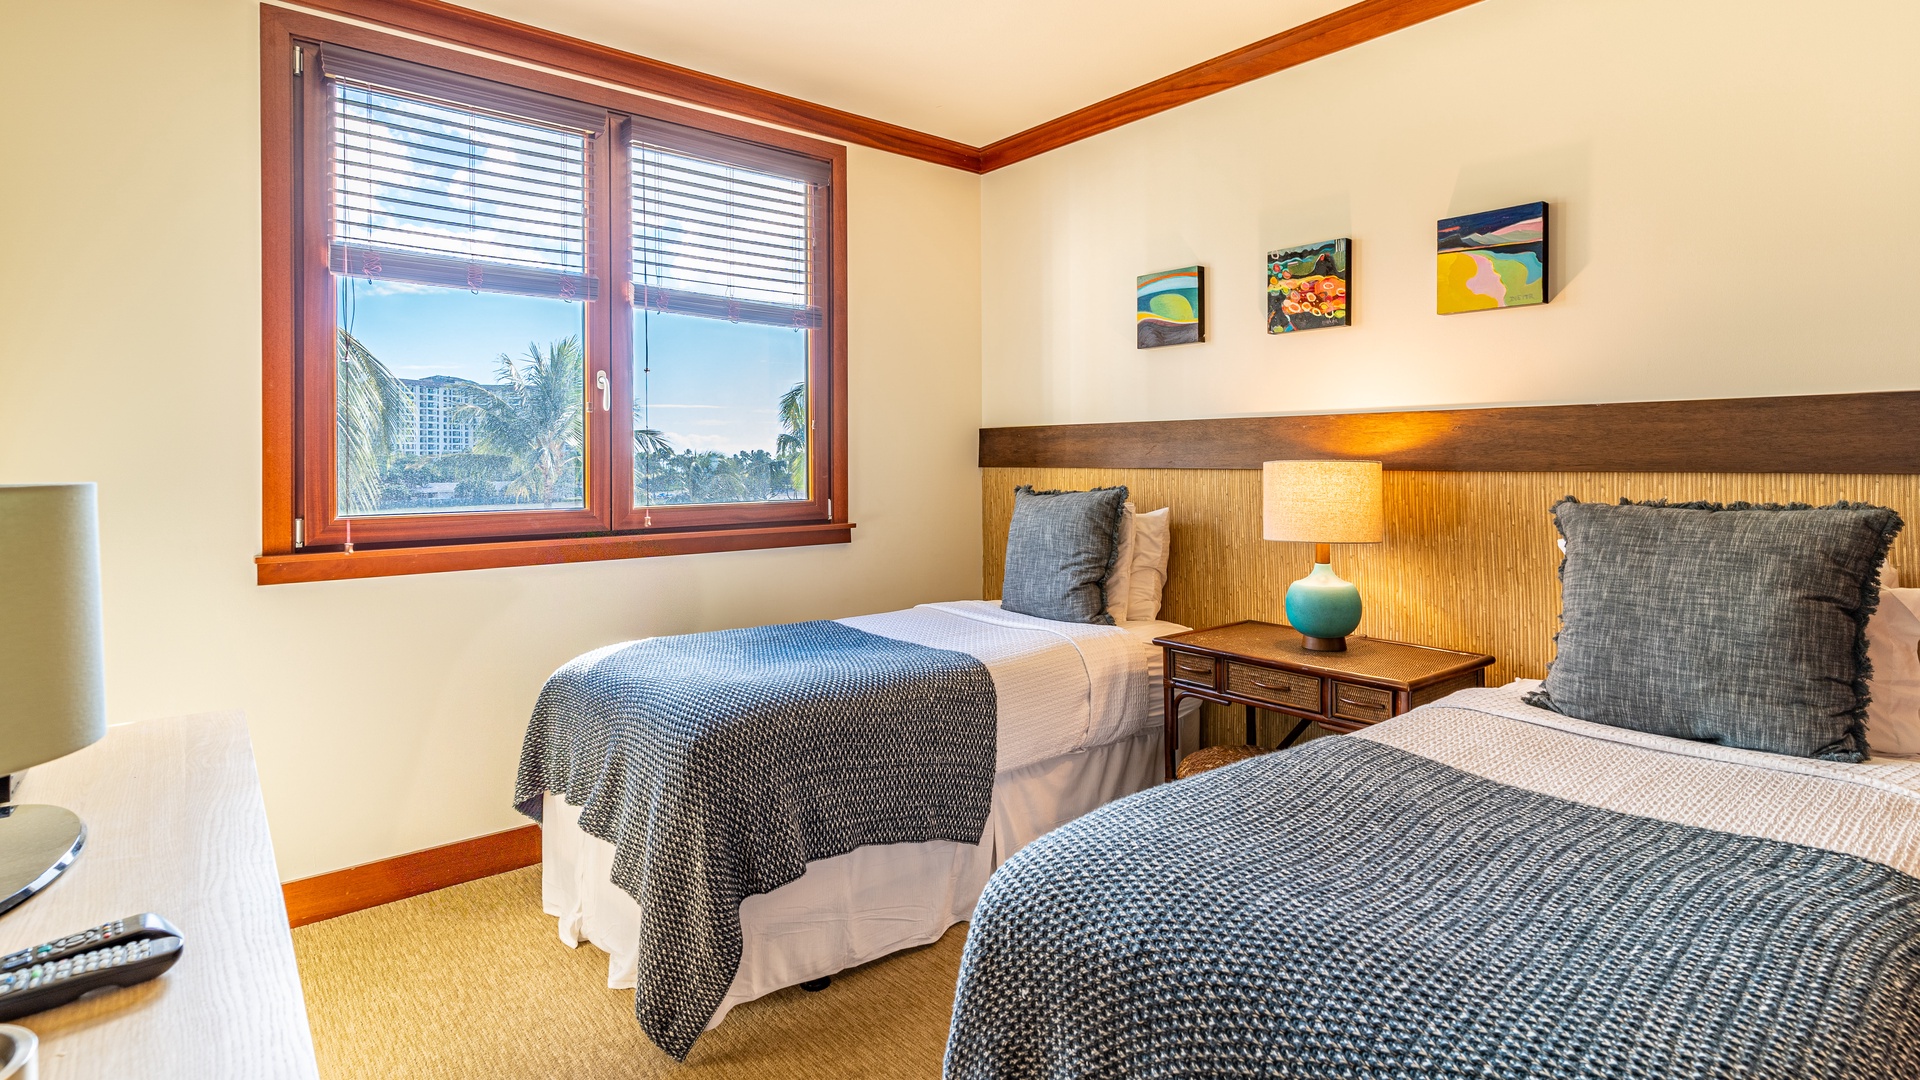 Kapolei Vacation Rentals, Ko Olina Beach Villas B403 - The third guest bedroom with two extra long twin beds that can be put together to make a king size bed.